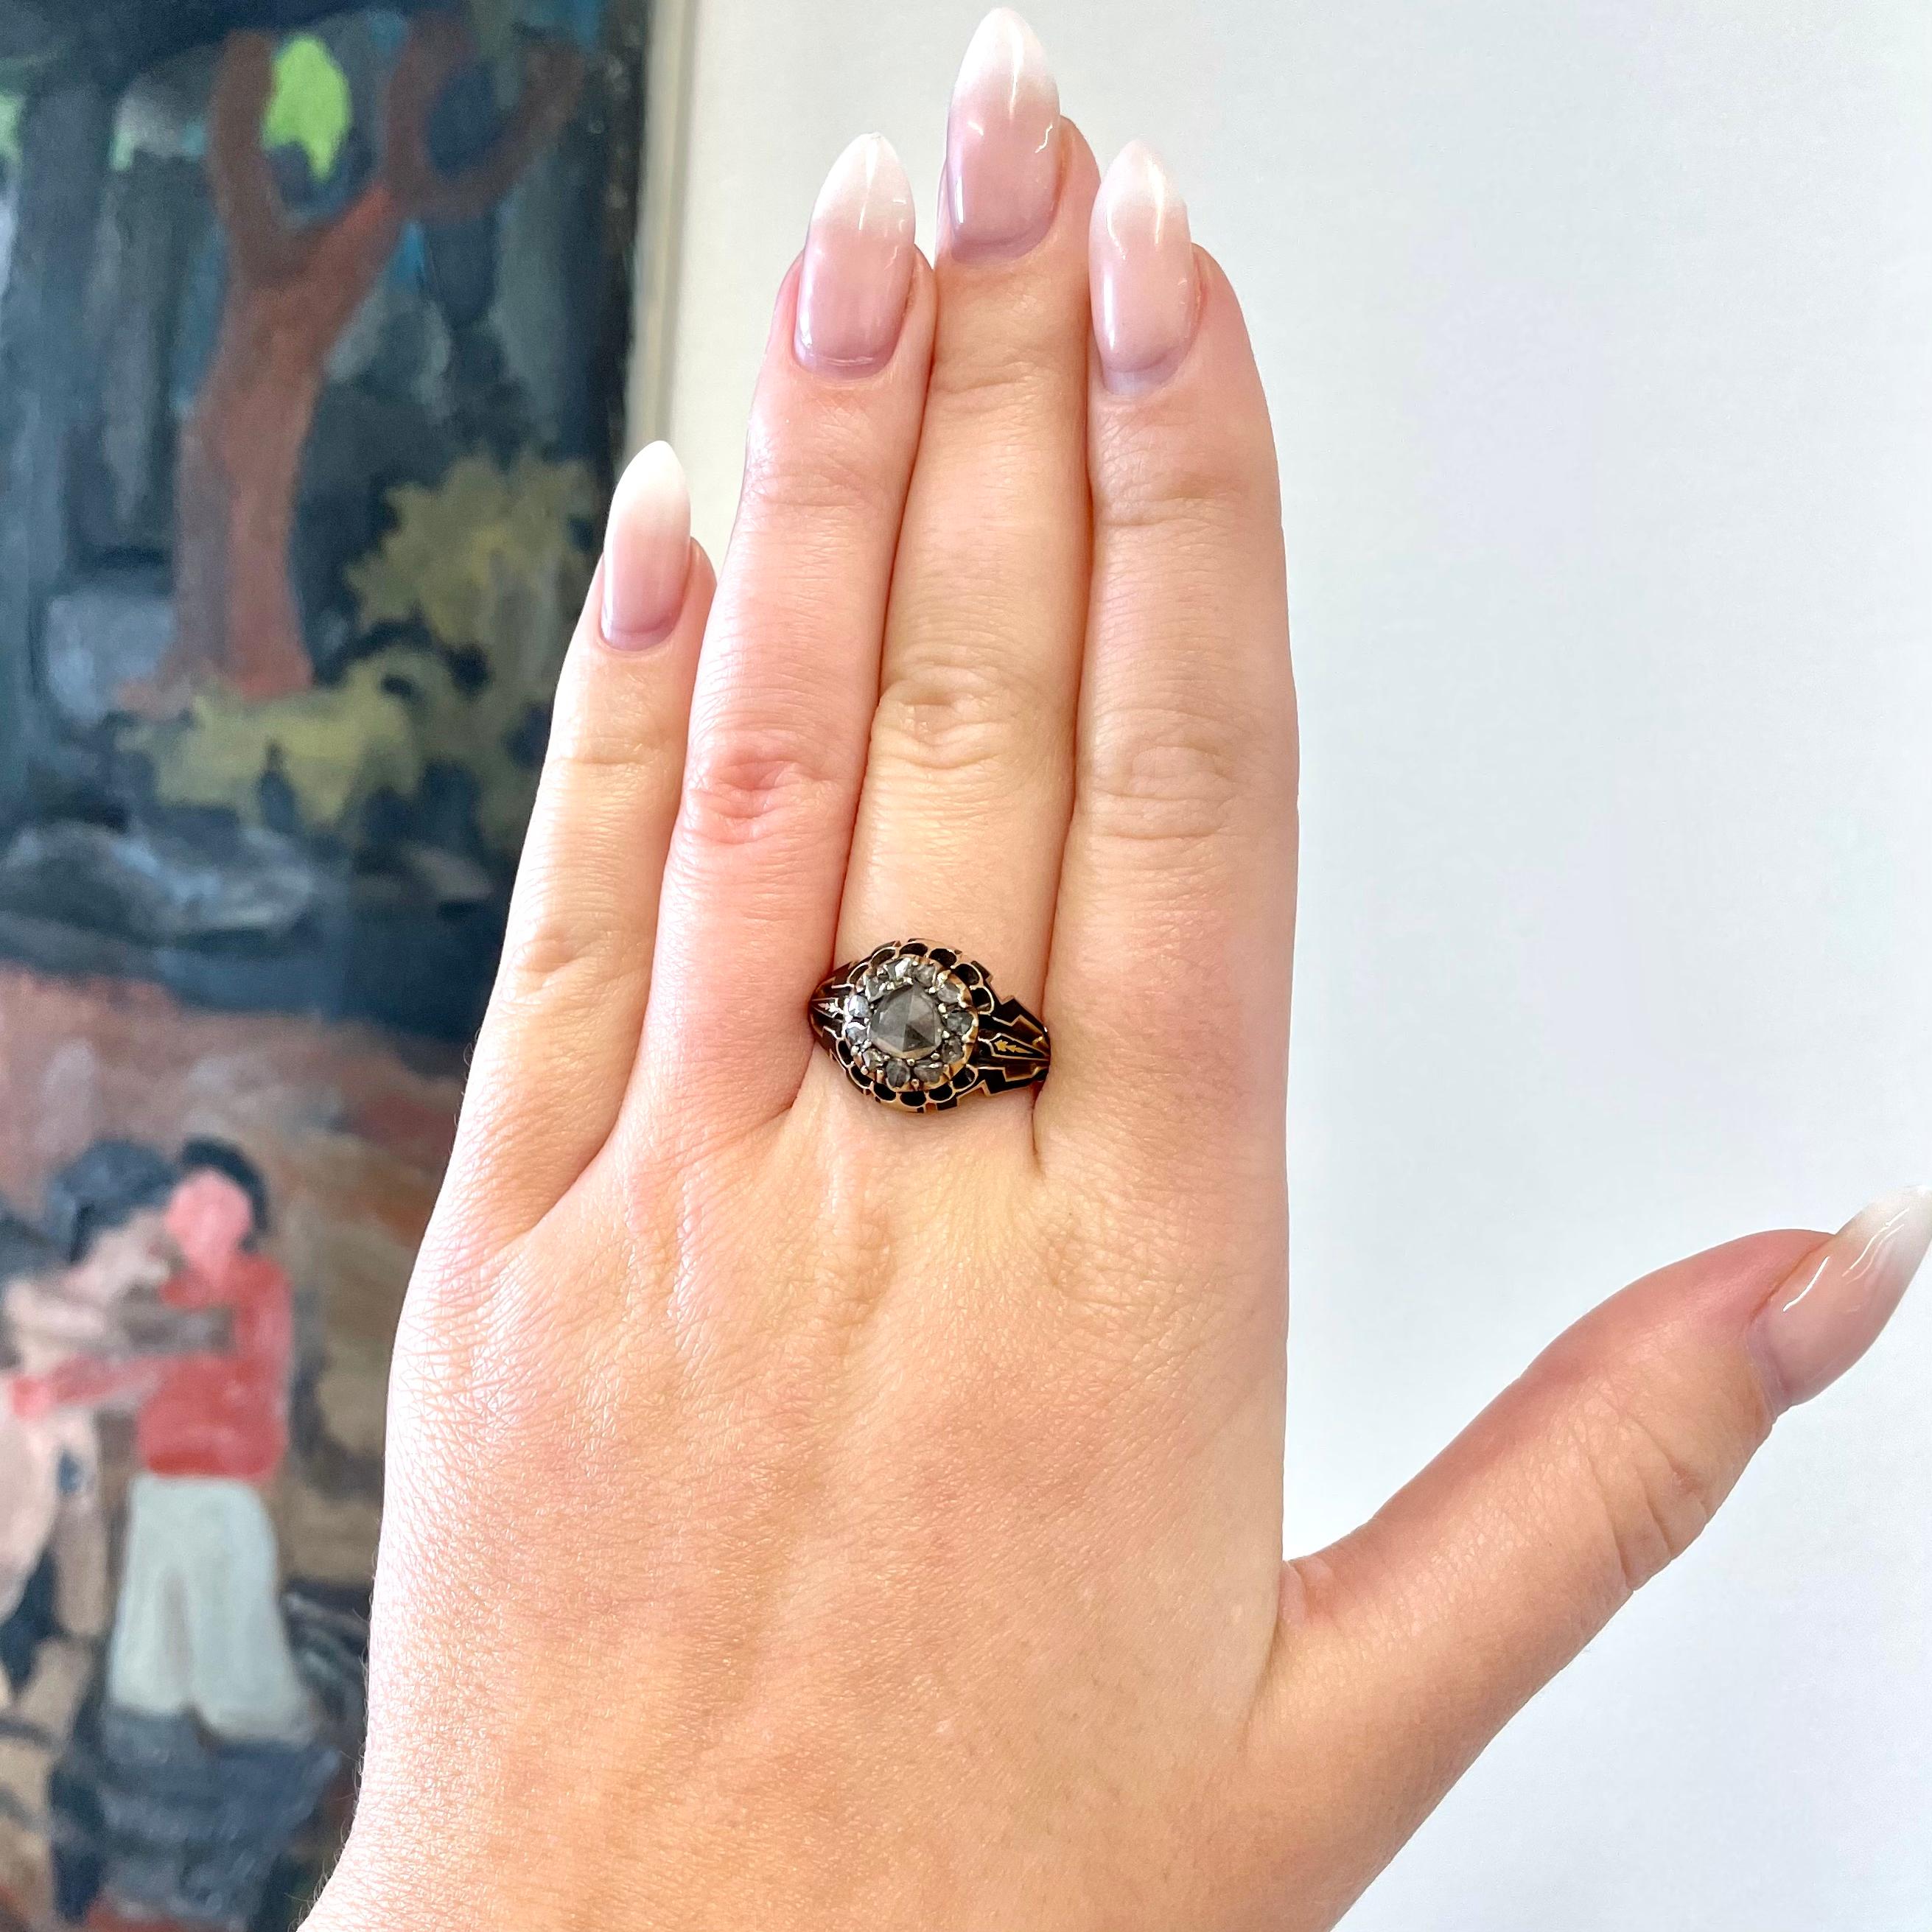 If you are an antique jewelry connoisseur, you will greatly appreciate this Antique Georgian Rose Cut Diamond Cluster Ring. Full of history and charm, this iconic ring is the perfect addition to your antique jewelry collection. 

The rose cut